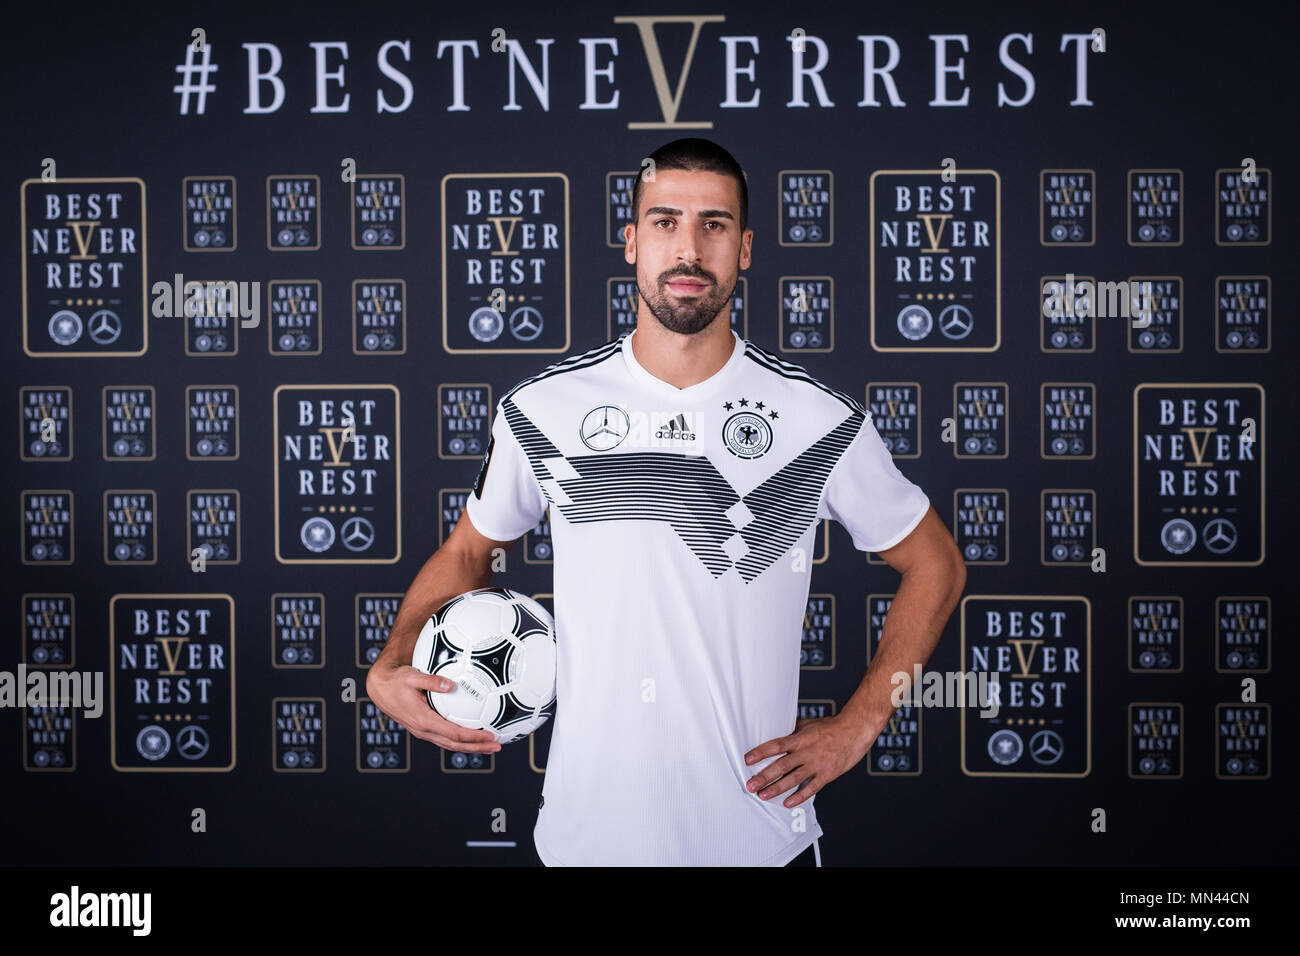 Sami Khedira (Germany) in front of the World Cup logo of the Mercedes-Benz  Generalsupplier (# BEST NEVER REST) Preview/Archive Image: Topic of the  caderbekanntgabe on 15.05.2018- GES/Football/DFB Marketing Day in the  Filmstudios